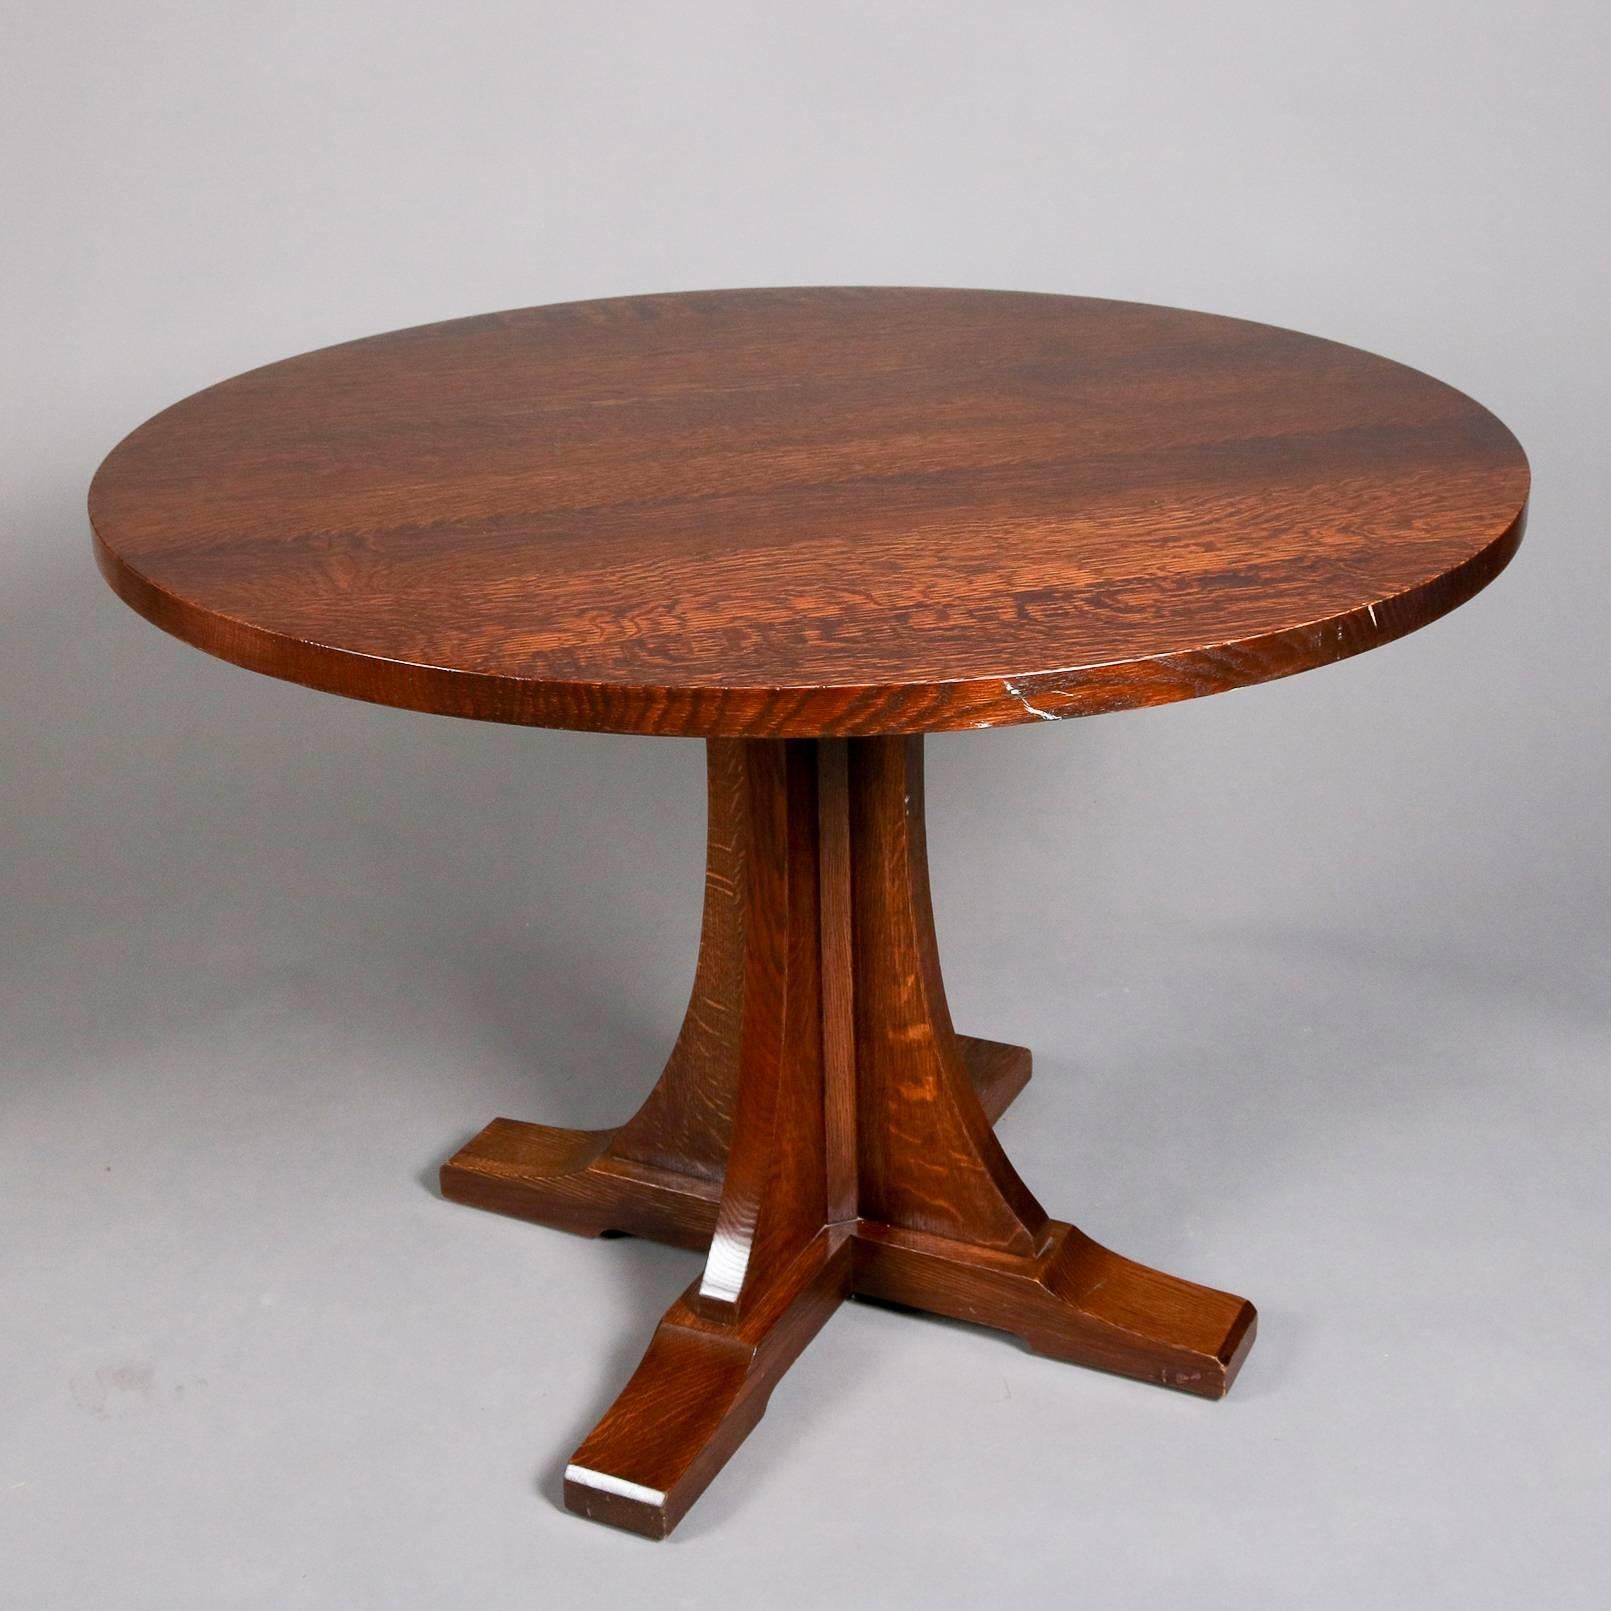 Contemporary Stickley Arts & Crafts Mission Oak Dining Round Table, 21st Century